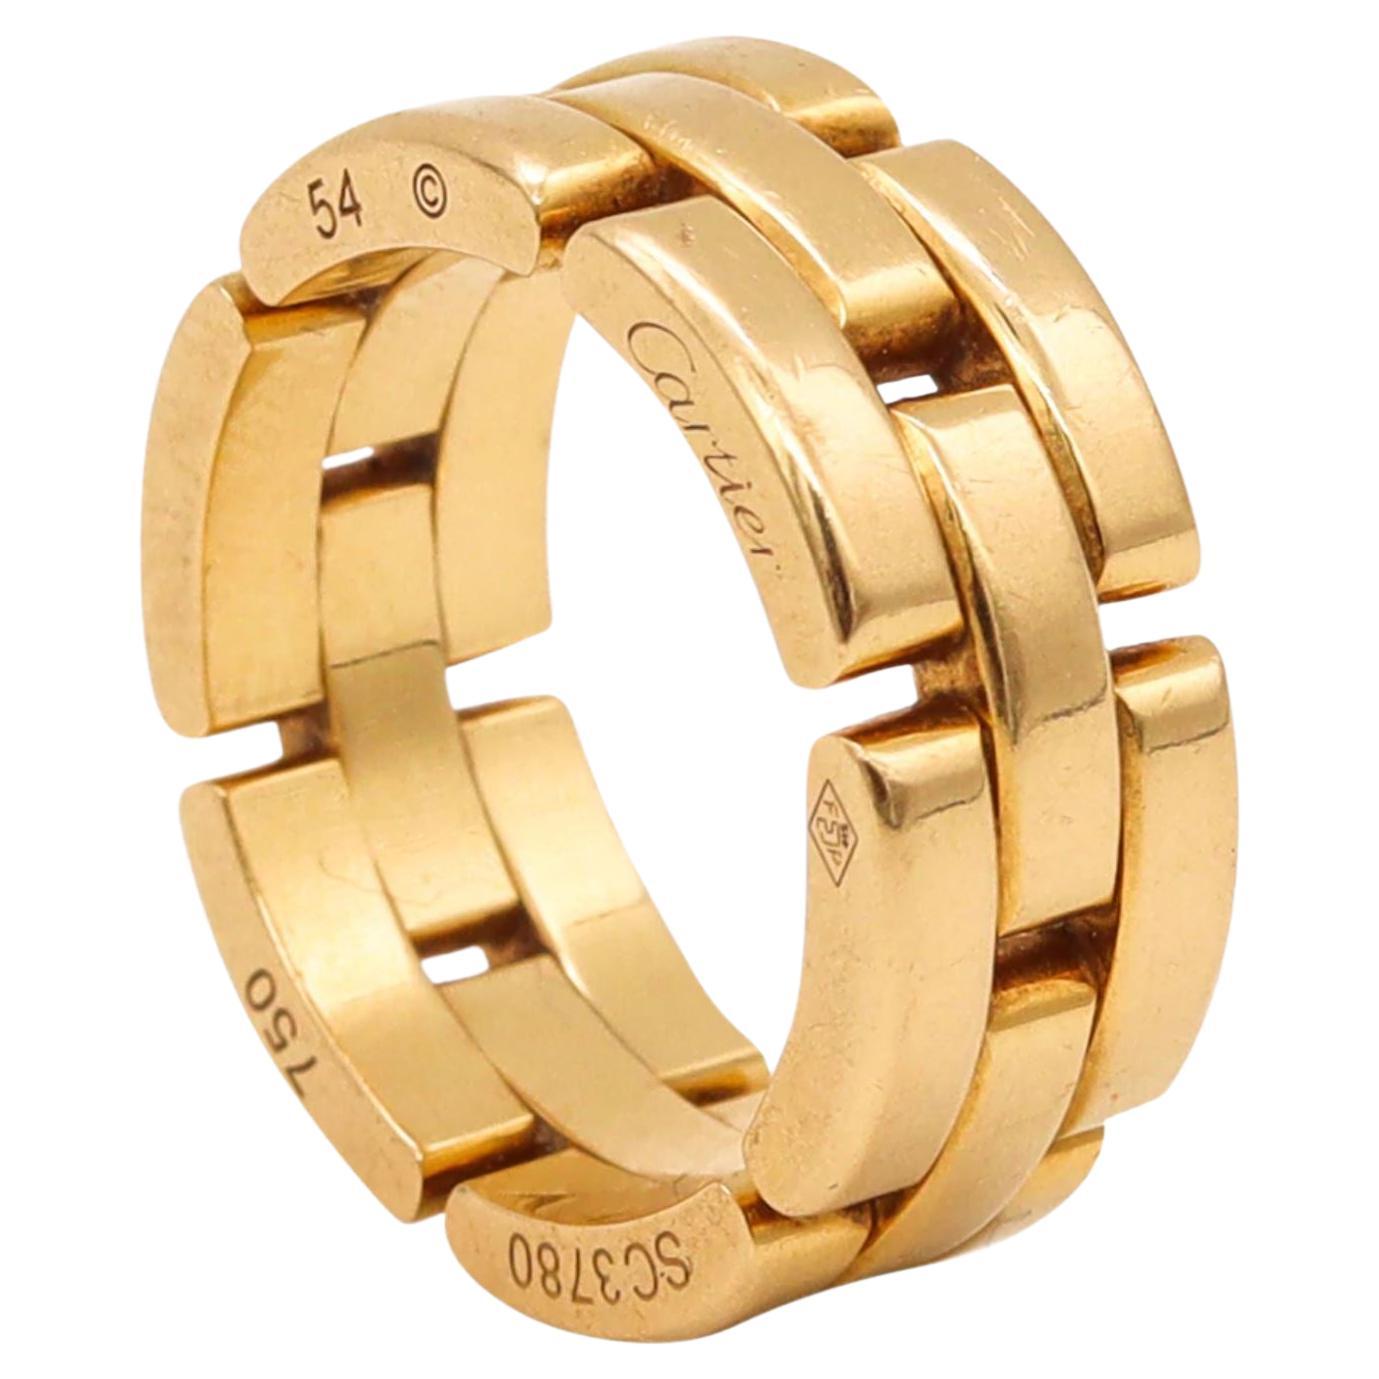 Cartier Paris Modern Maillon Panthere Ring Band in Solid 18 Karat Yellow Gold